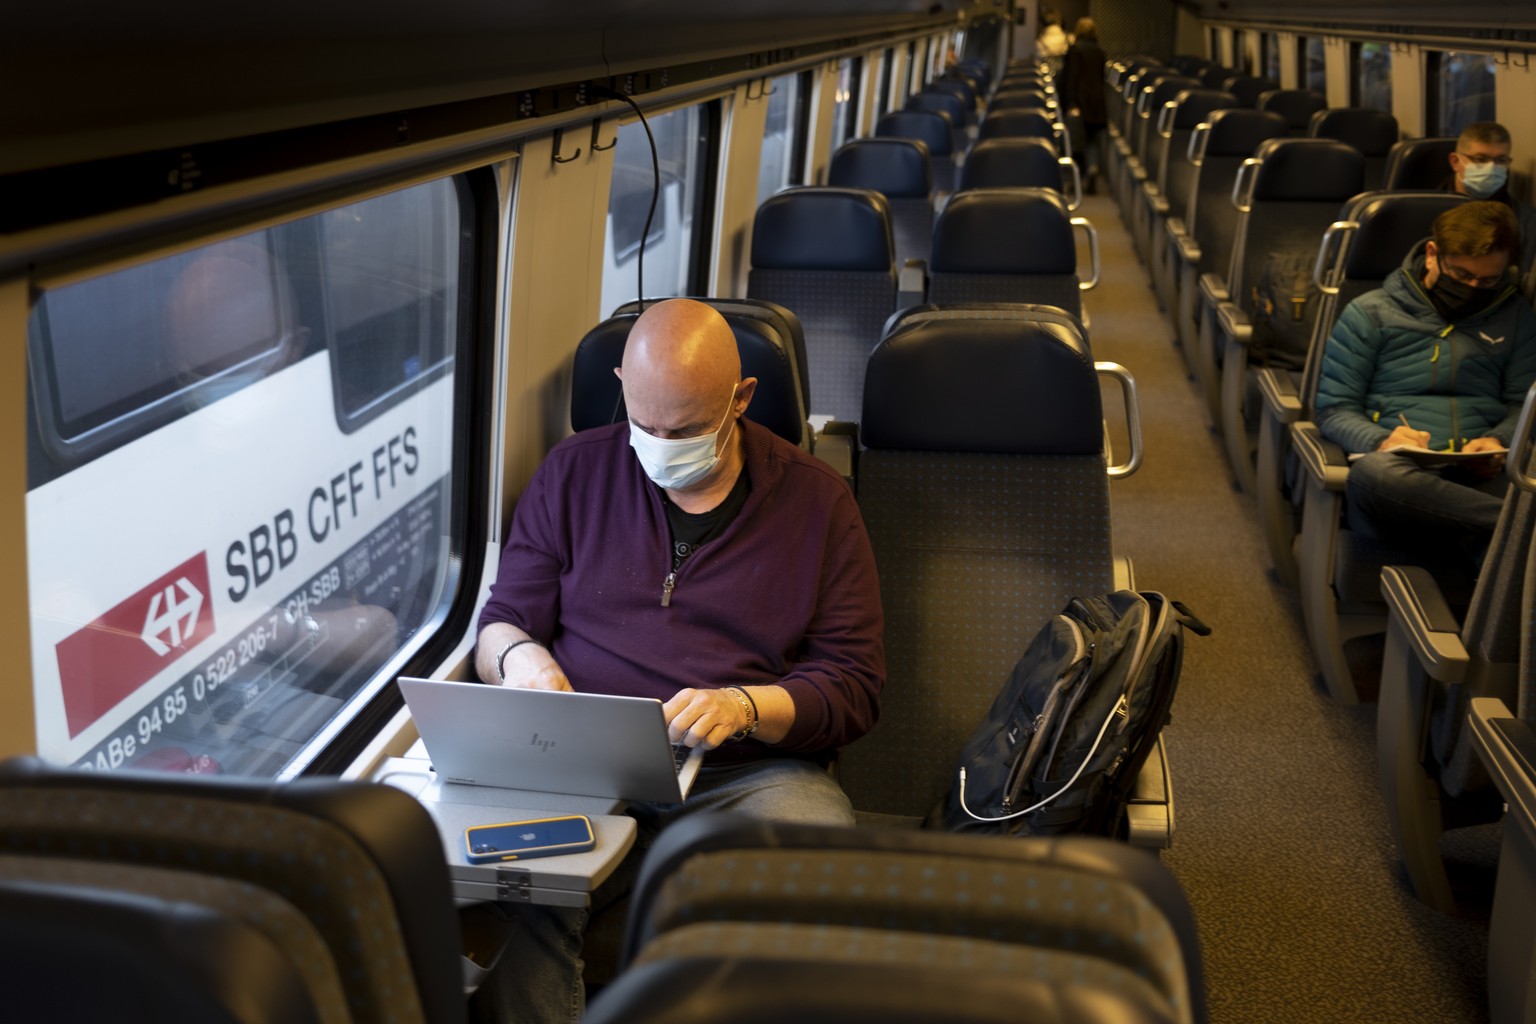 Passenger wearing protective mask works on a laptop as he rides a SBB CFF FFS train during the coronavirus disease (COVID-19) outbreak, in Biel Bienne, Switzerland, Tuesday, March 23, 2021. Switzerlan ...